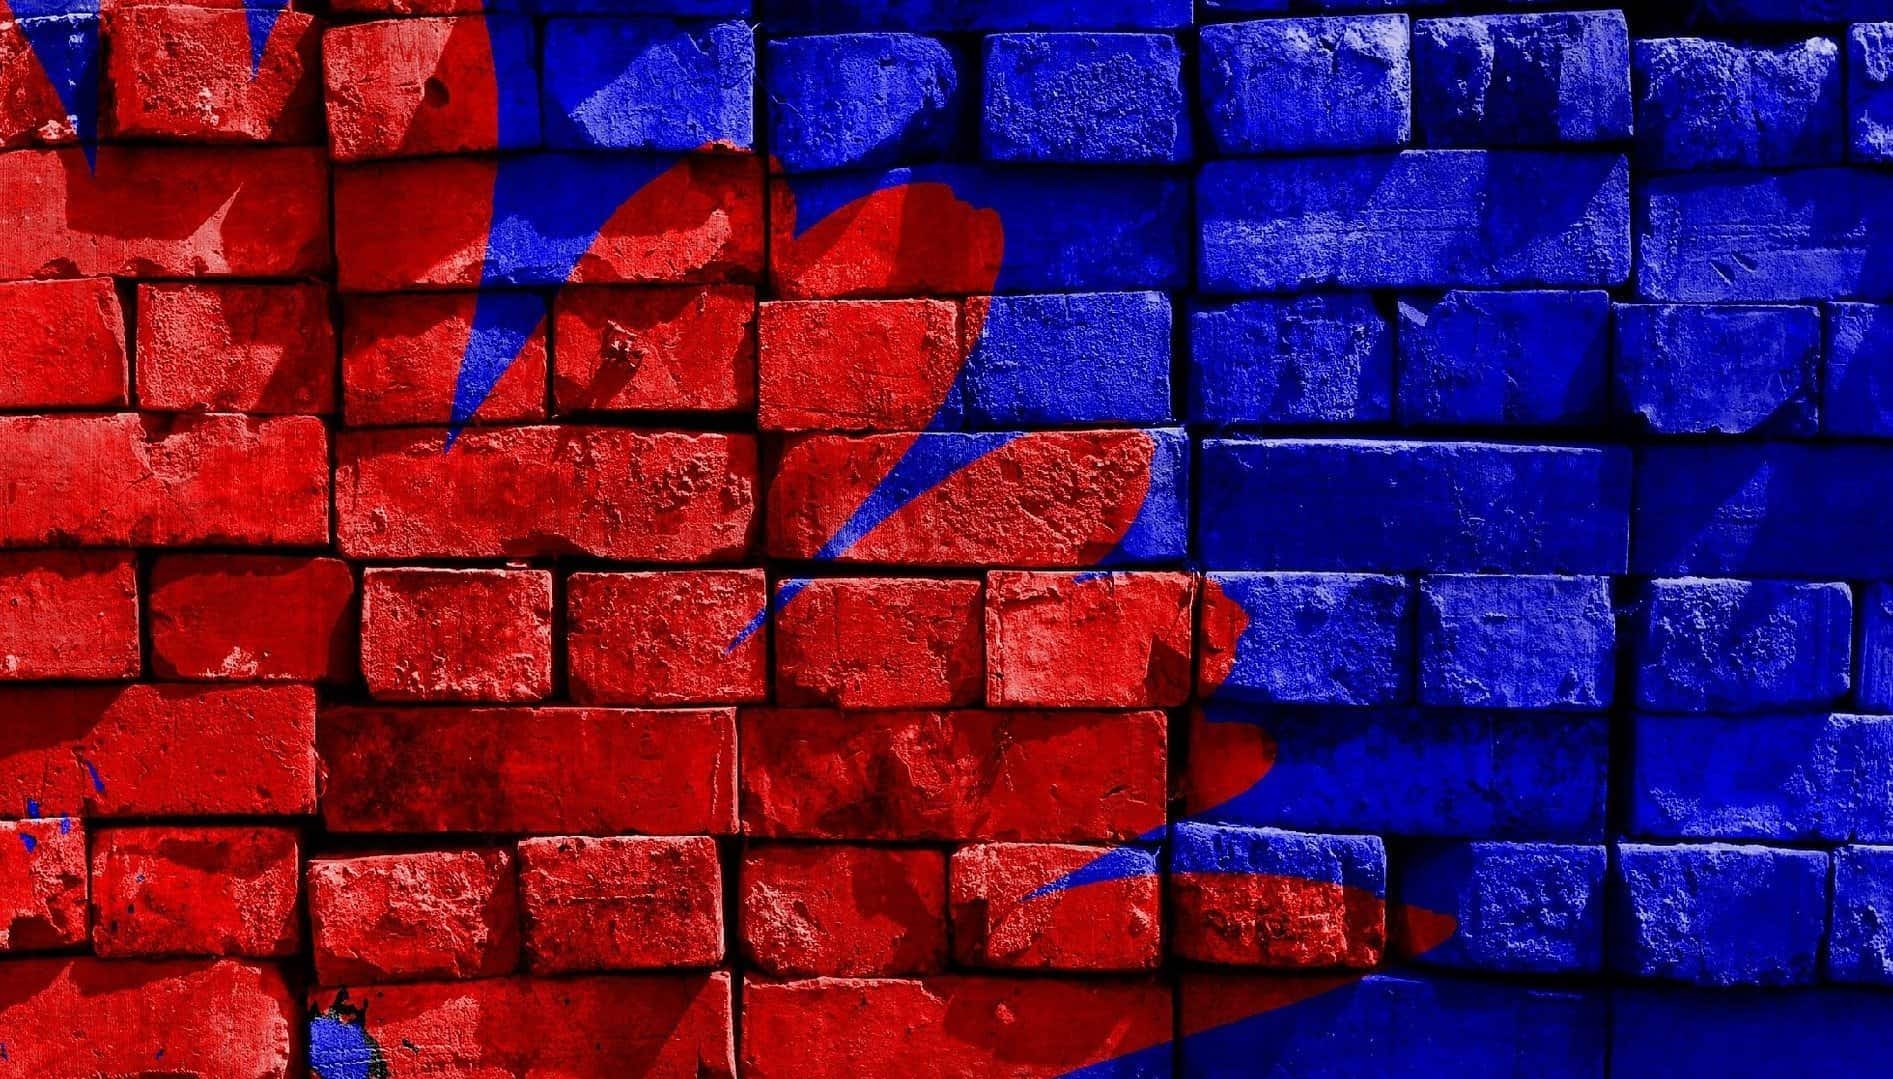 red and blue bricks